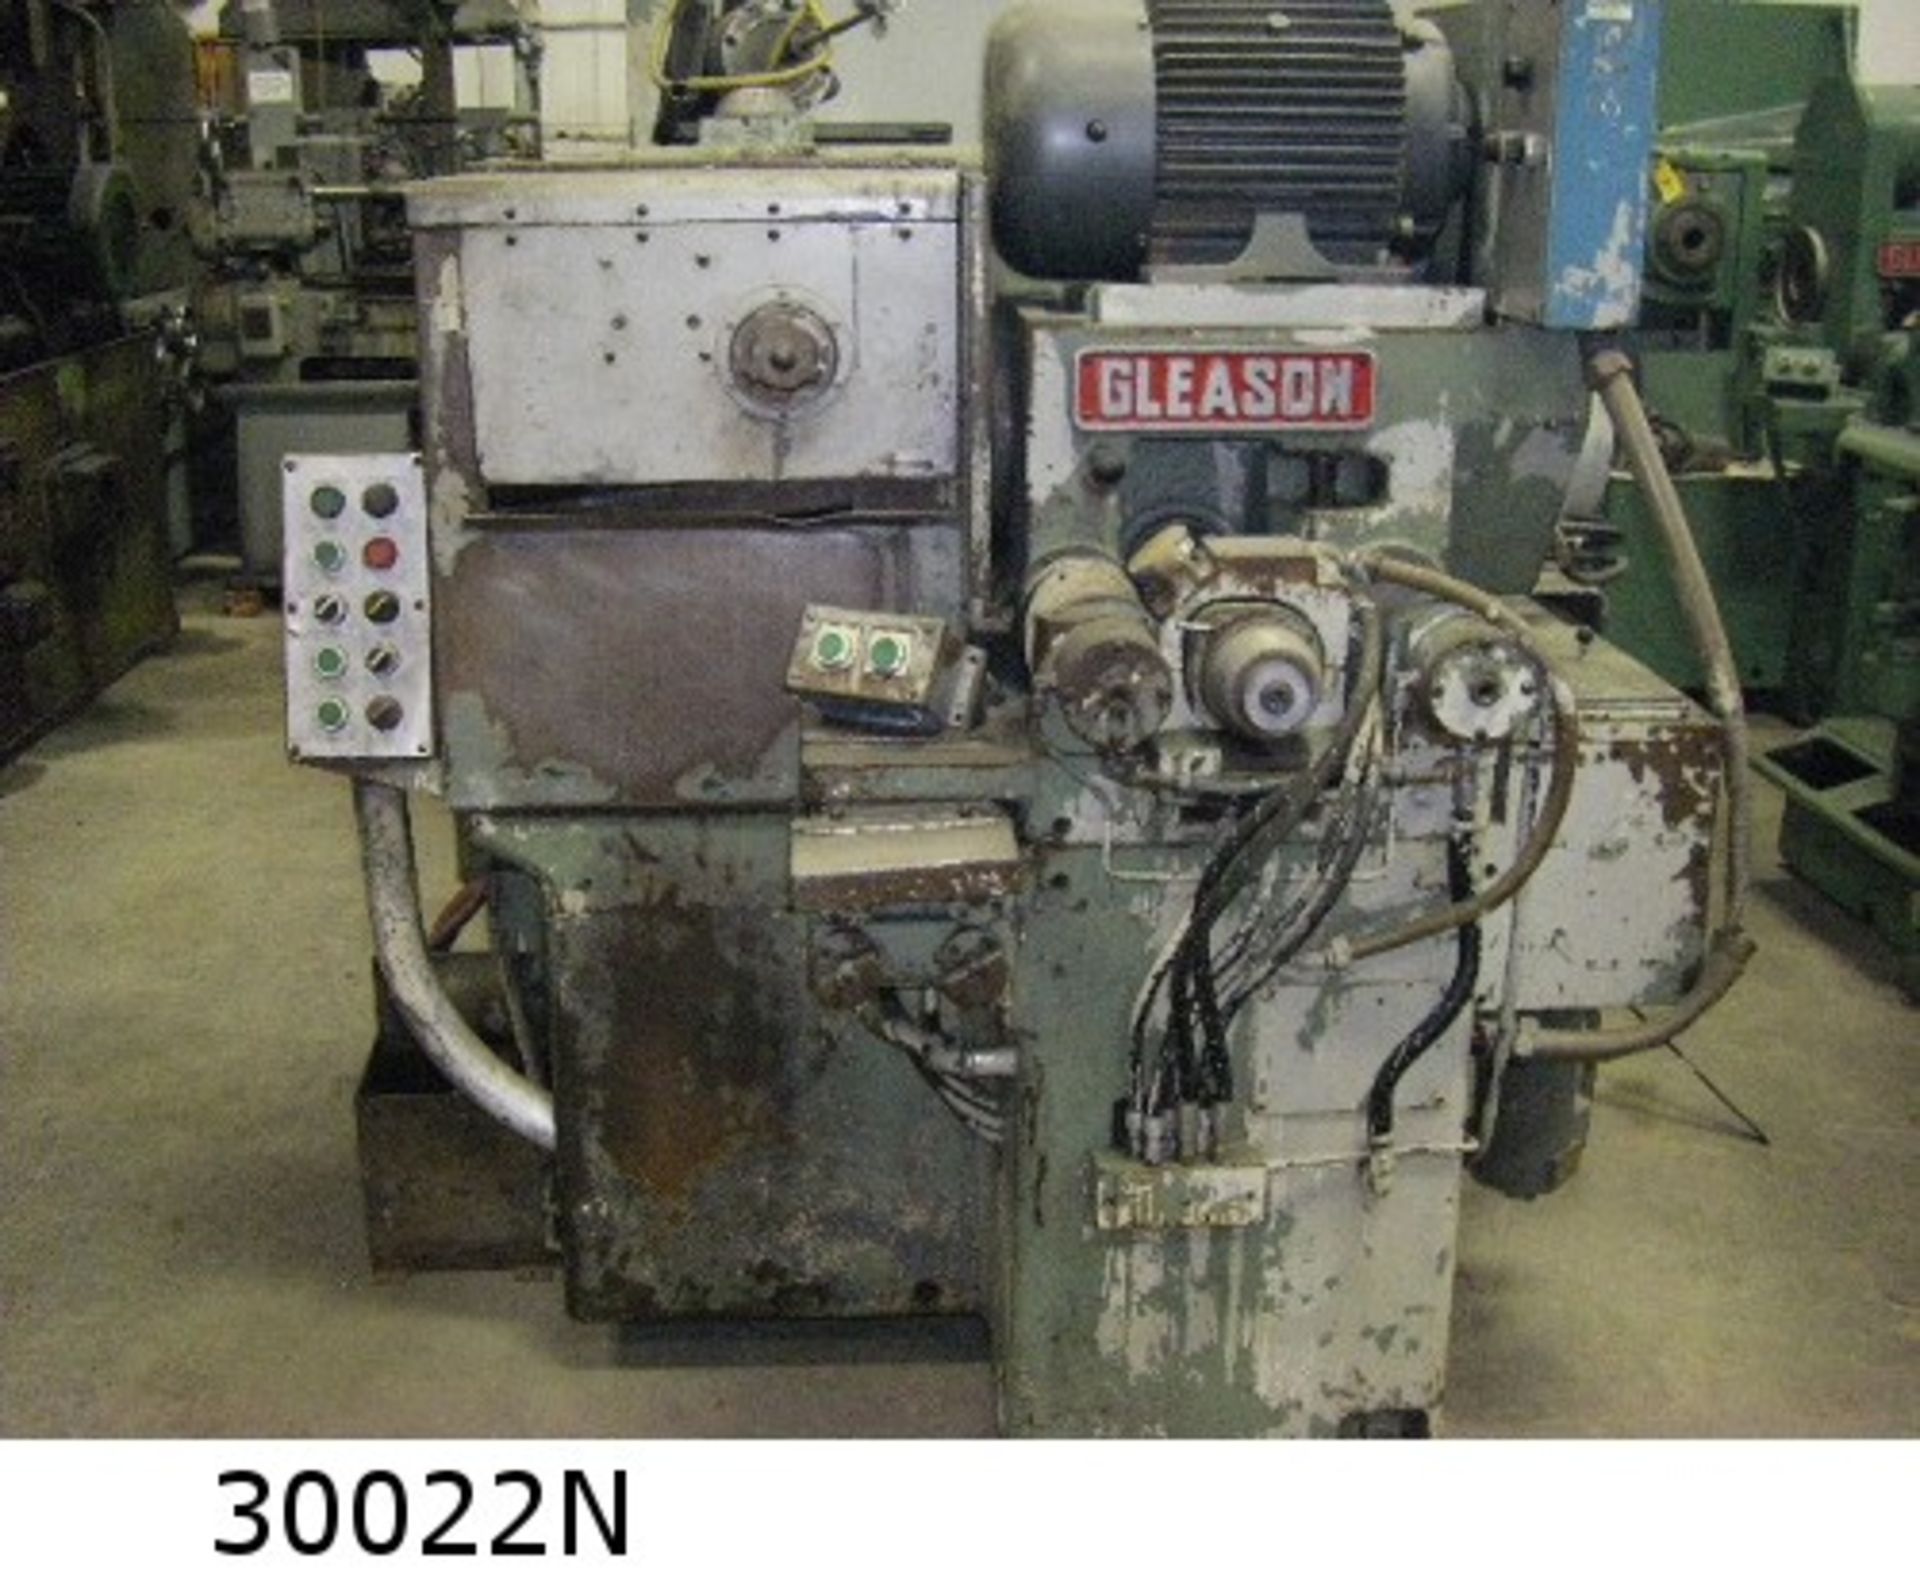 GLEASON 503 HYPOID GEAR LAPPING MACHINE. SERIAL NO. 639811, BUILT 1965